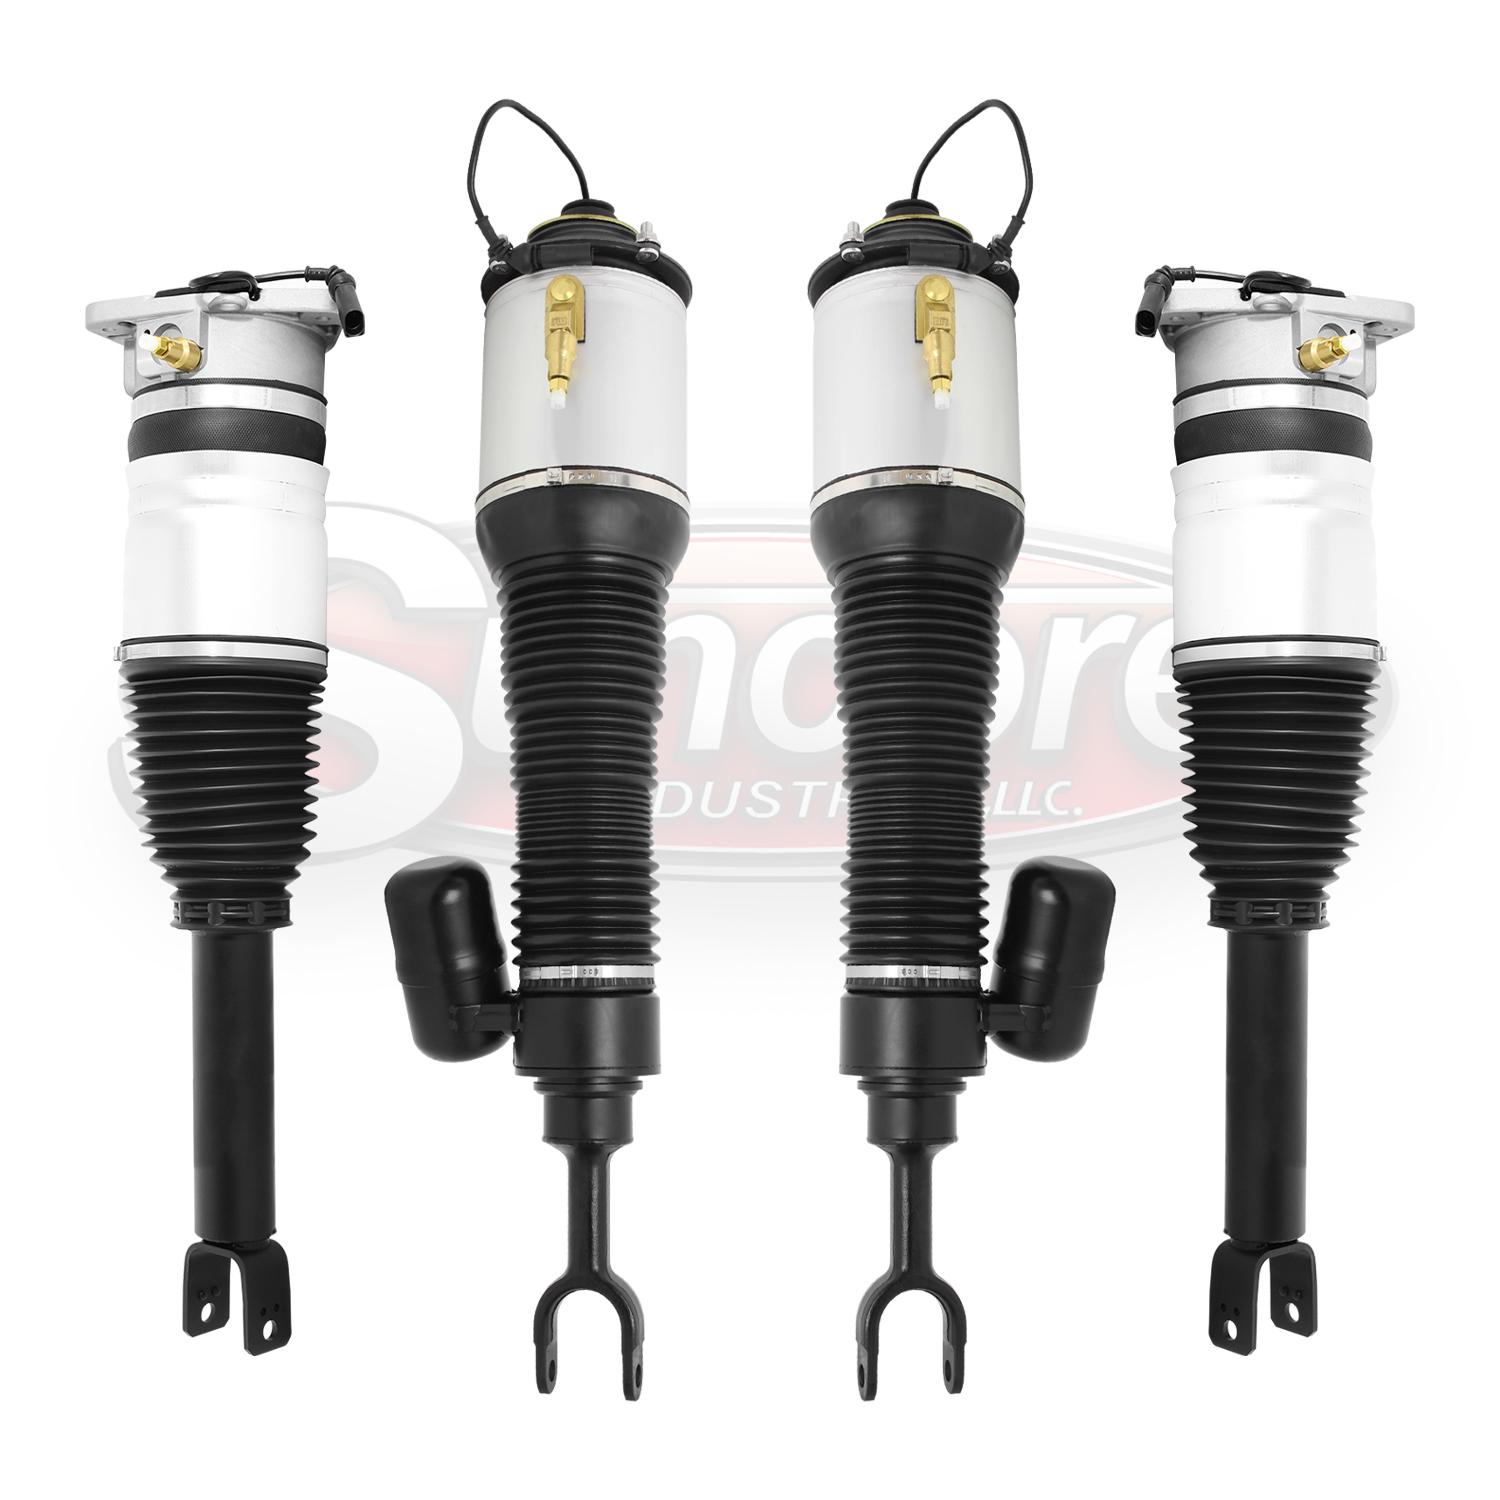 Front & Rear Air Ride Suspension Air Strut Assemblies for Bentley Continental, Flying Spur, Volkswagen Phaeton